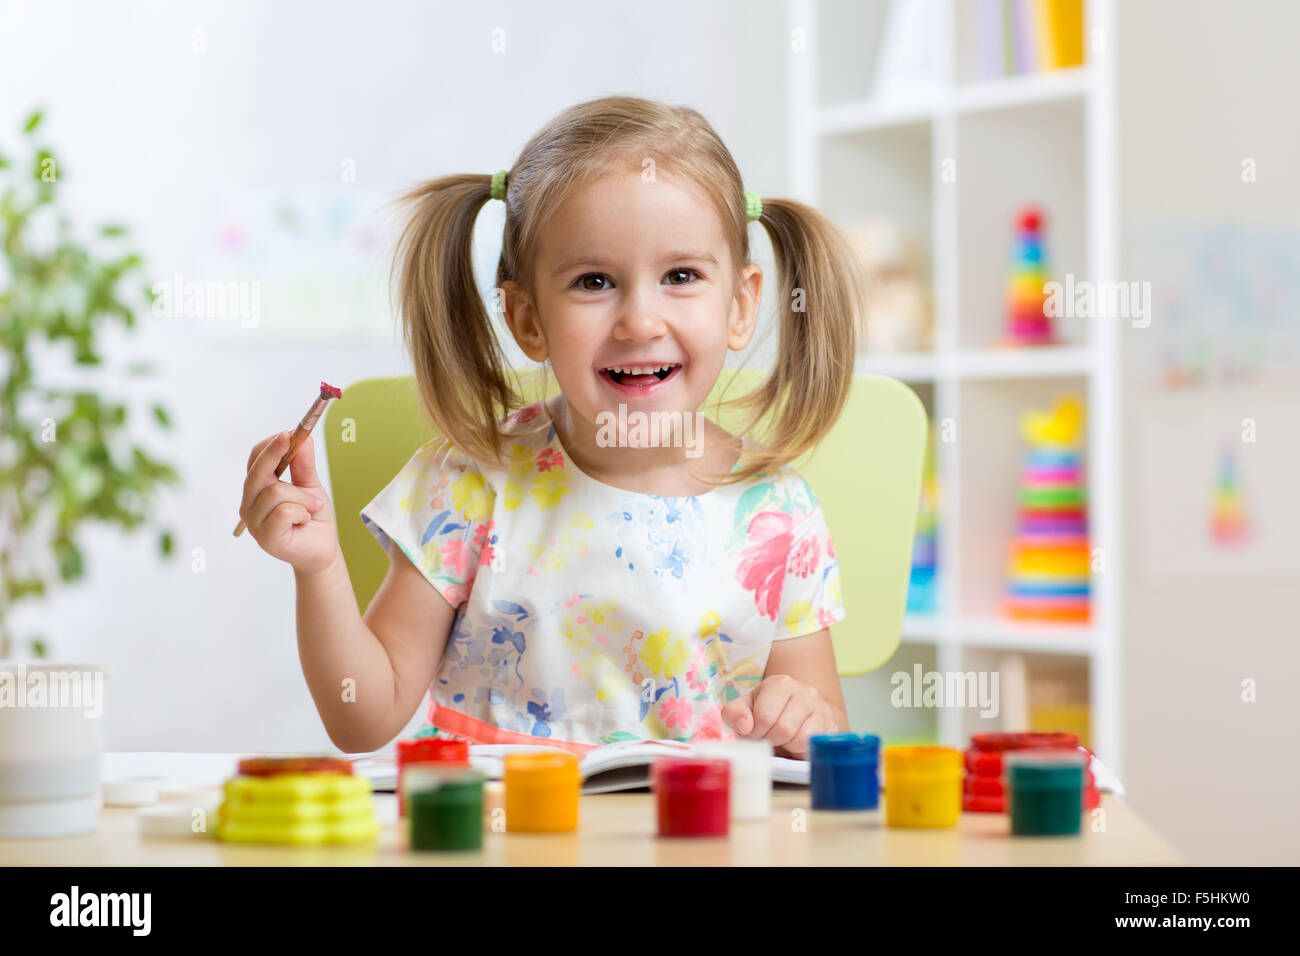 kid playing and painting at home or kindergarten or playschool Stock Photo